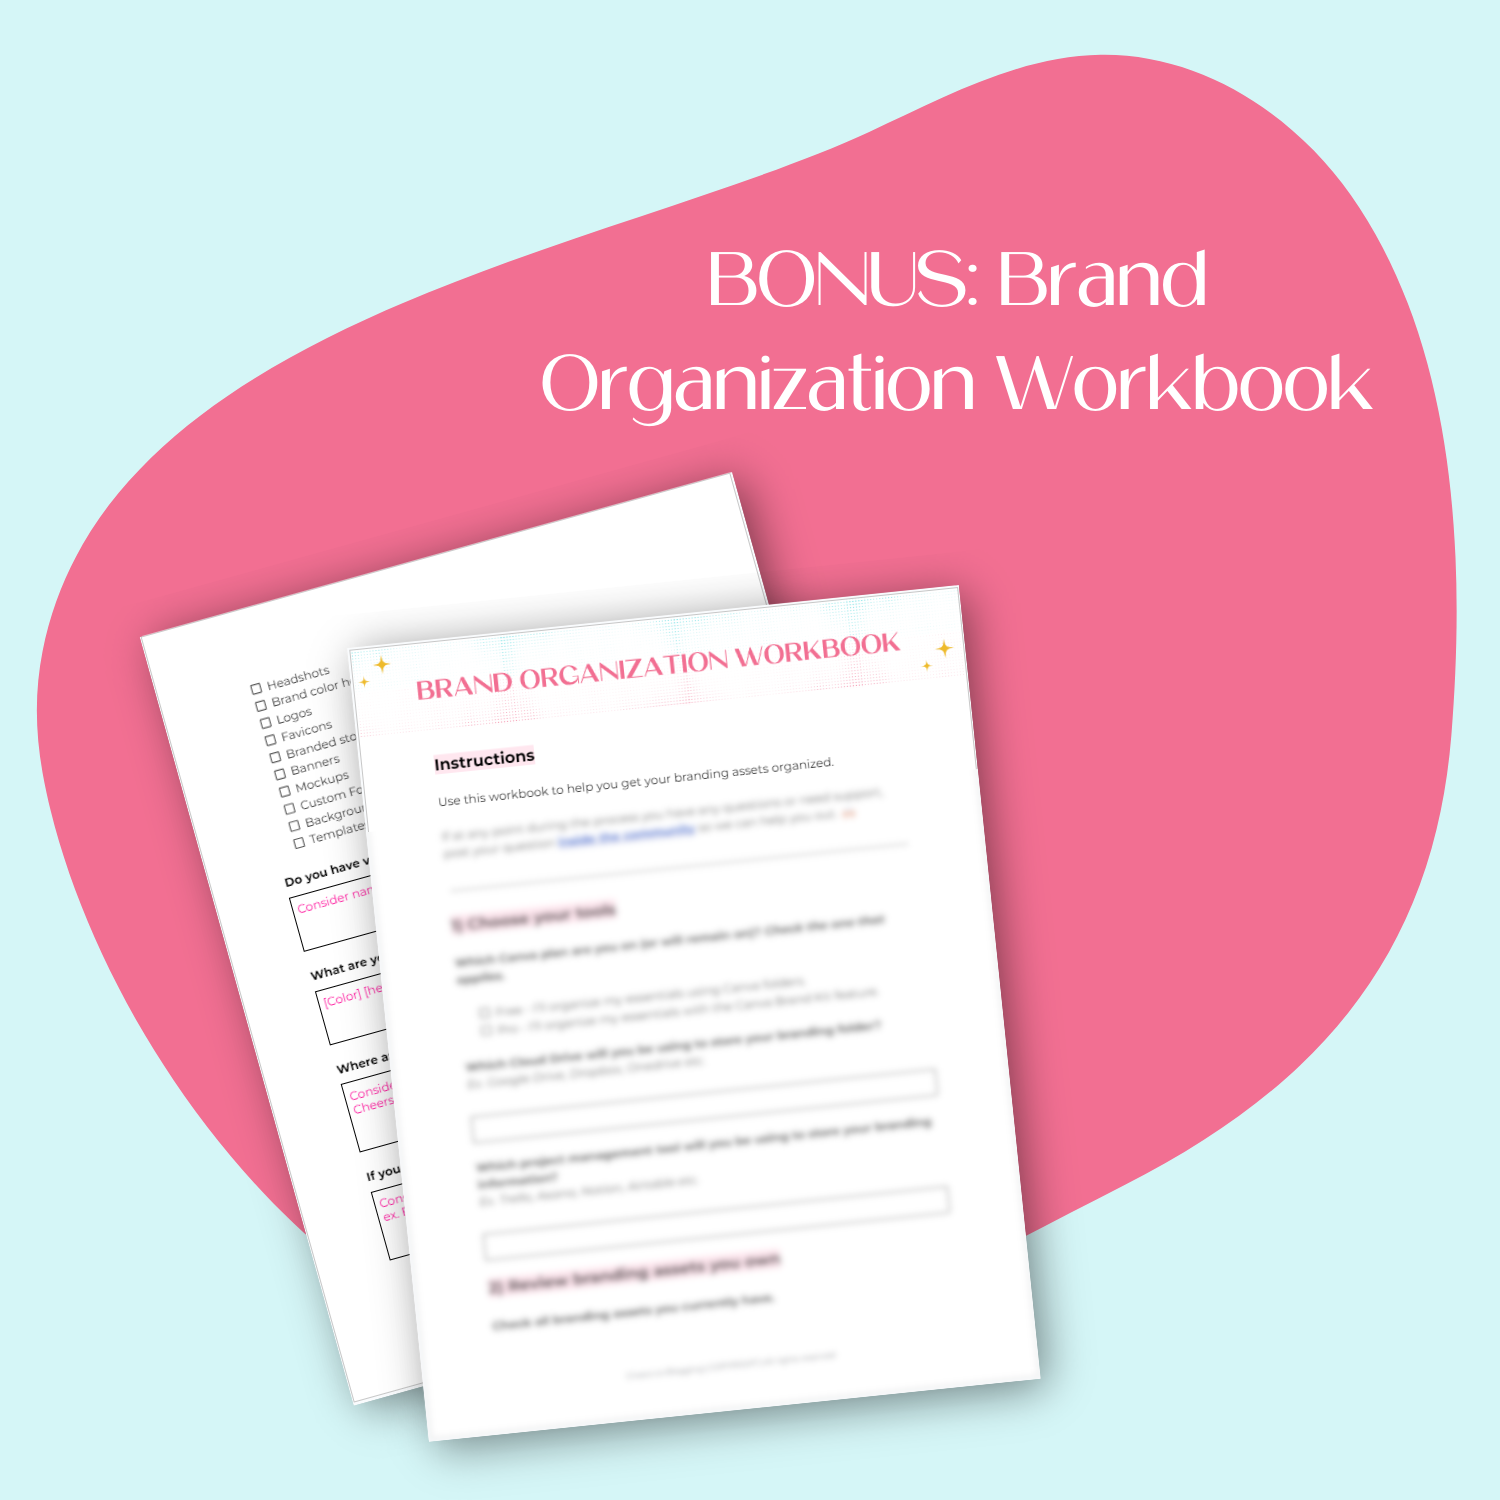 A document mockup displaying the bonus, Brand Organization Workbook to help you create your plan for getting your branding assets organized.